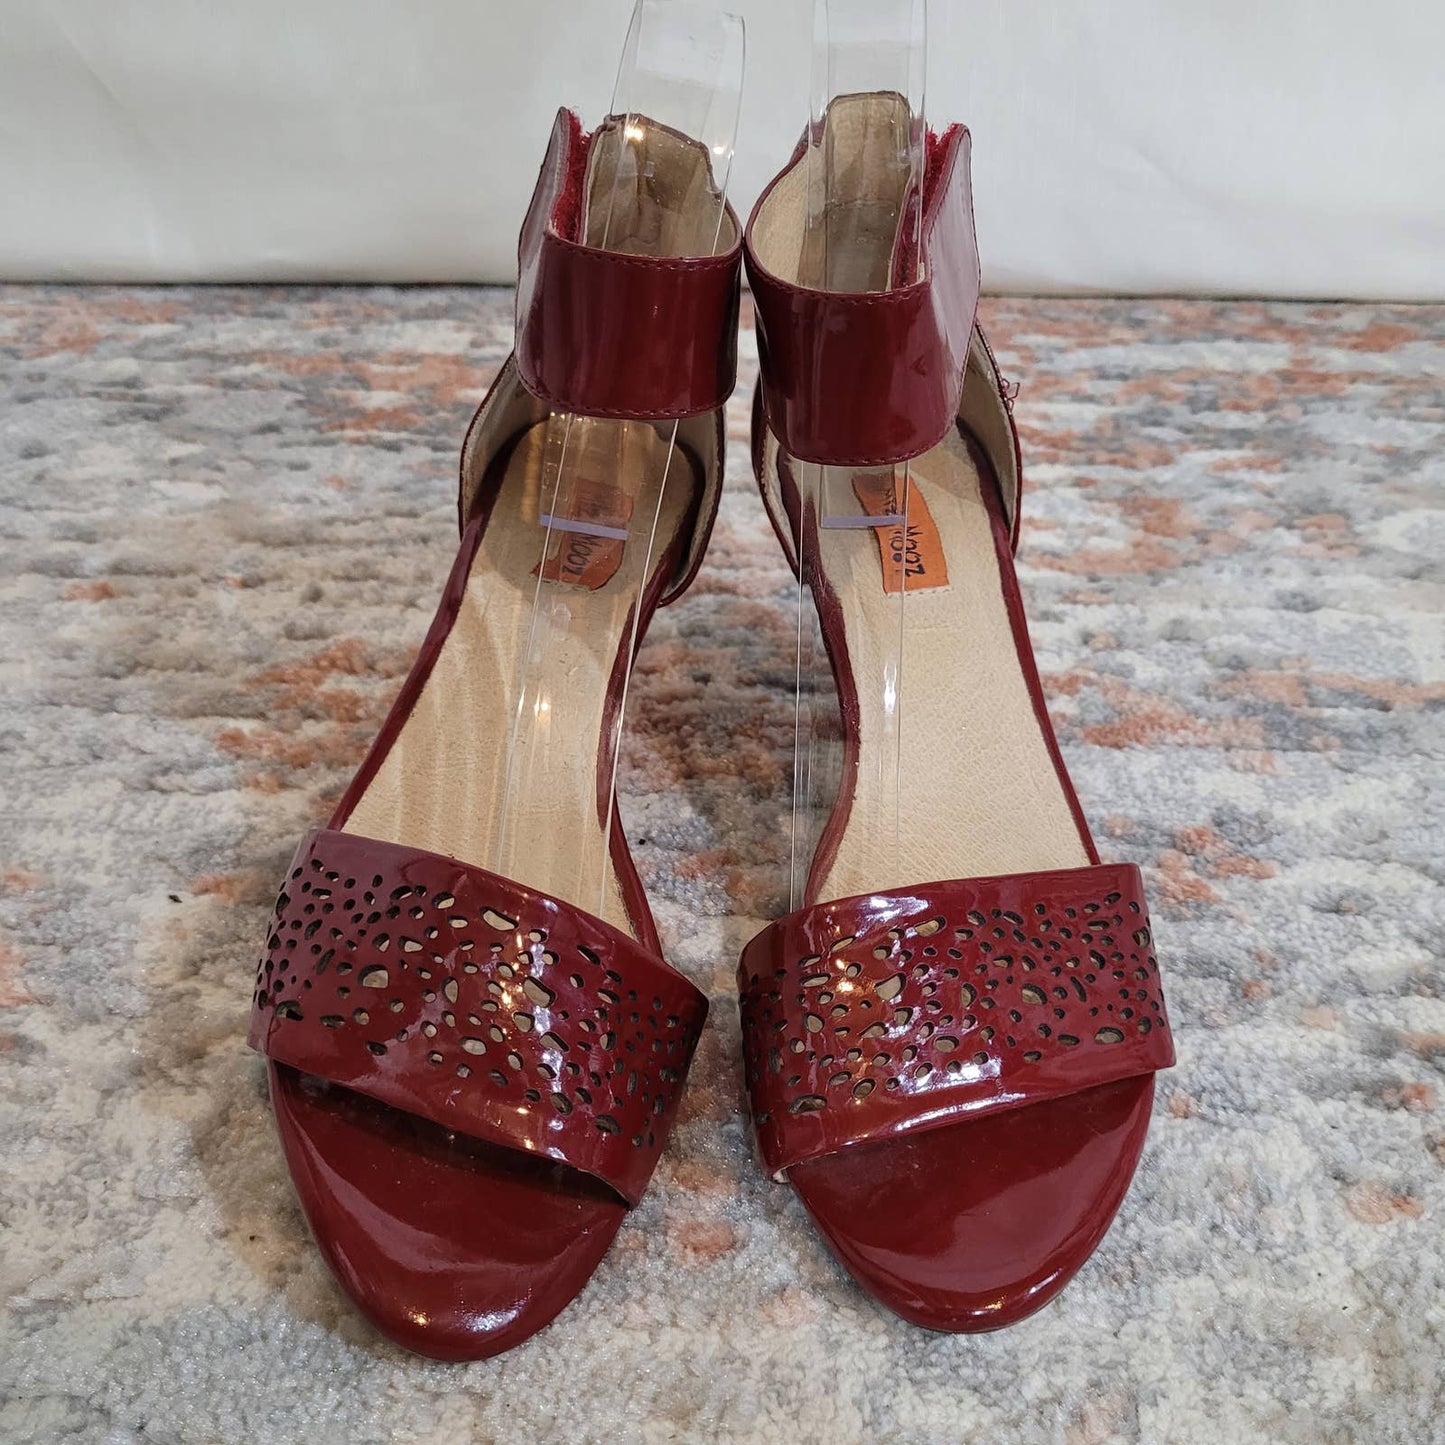 Miz Mooz Wynn Patent Leather Red Sandals with Real Leather Lining - Size 6